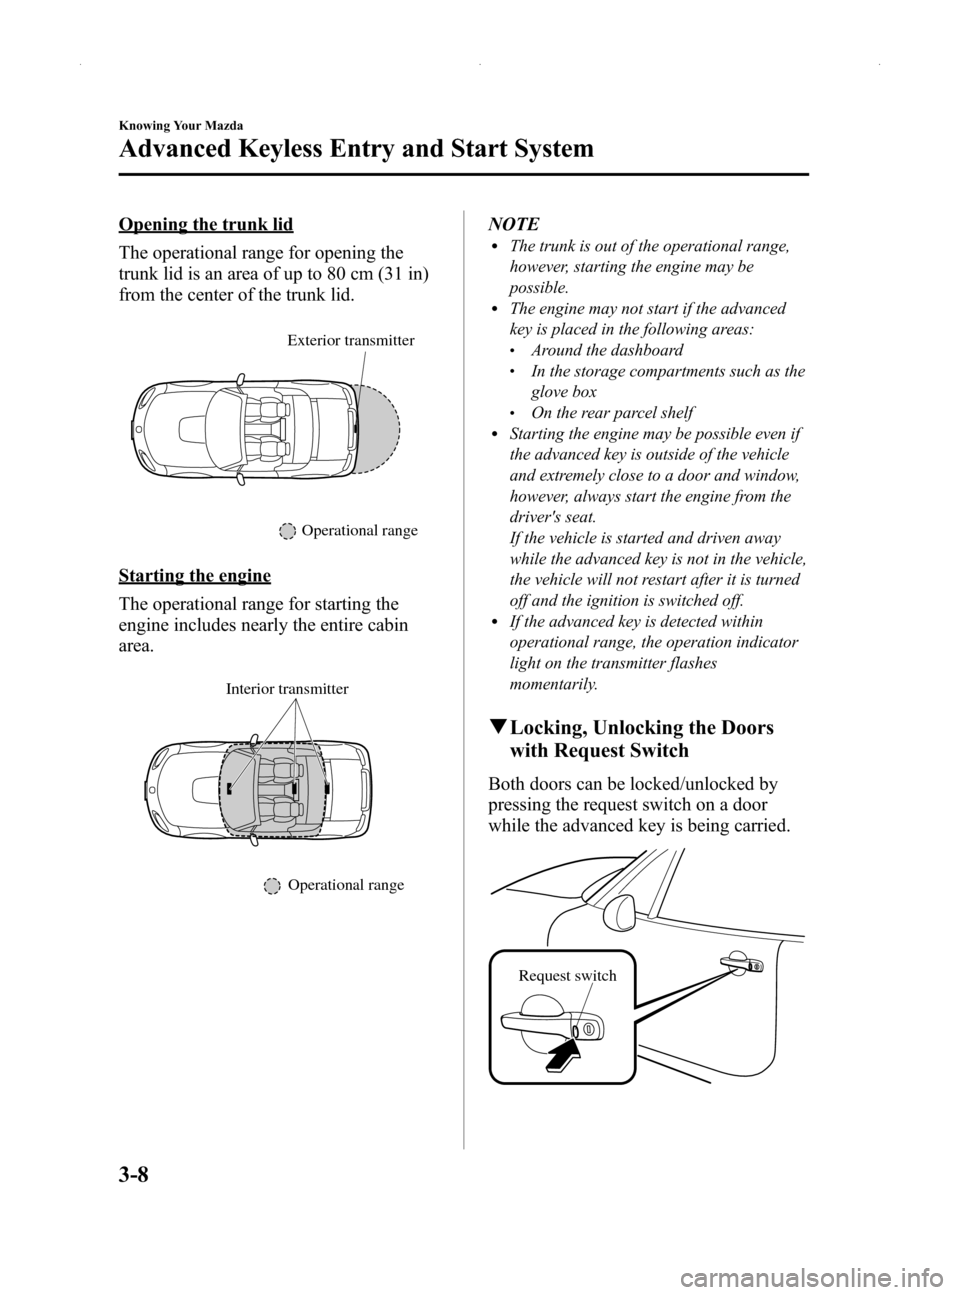 MAZDA MODEL MX-5 2014   (in English) Repair Manual Black plate (62,1)
Opening the trunk lid
The operational range for opening the
trunk lid is an area of up to 80 cm (31 in)
from the center of the trunk lid.
Exterior transmitter
Operational range
Star